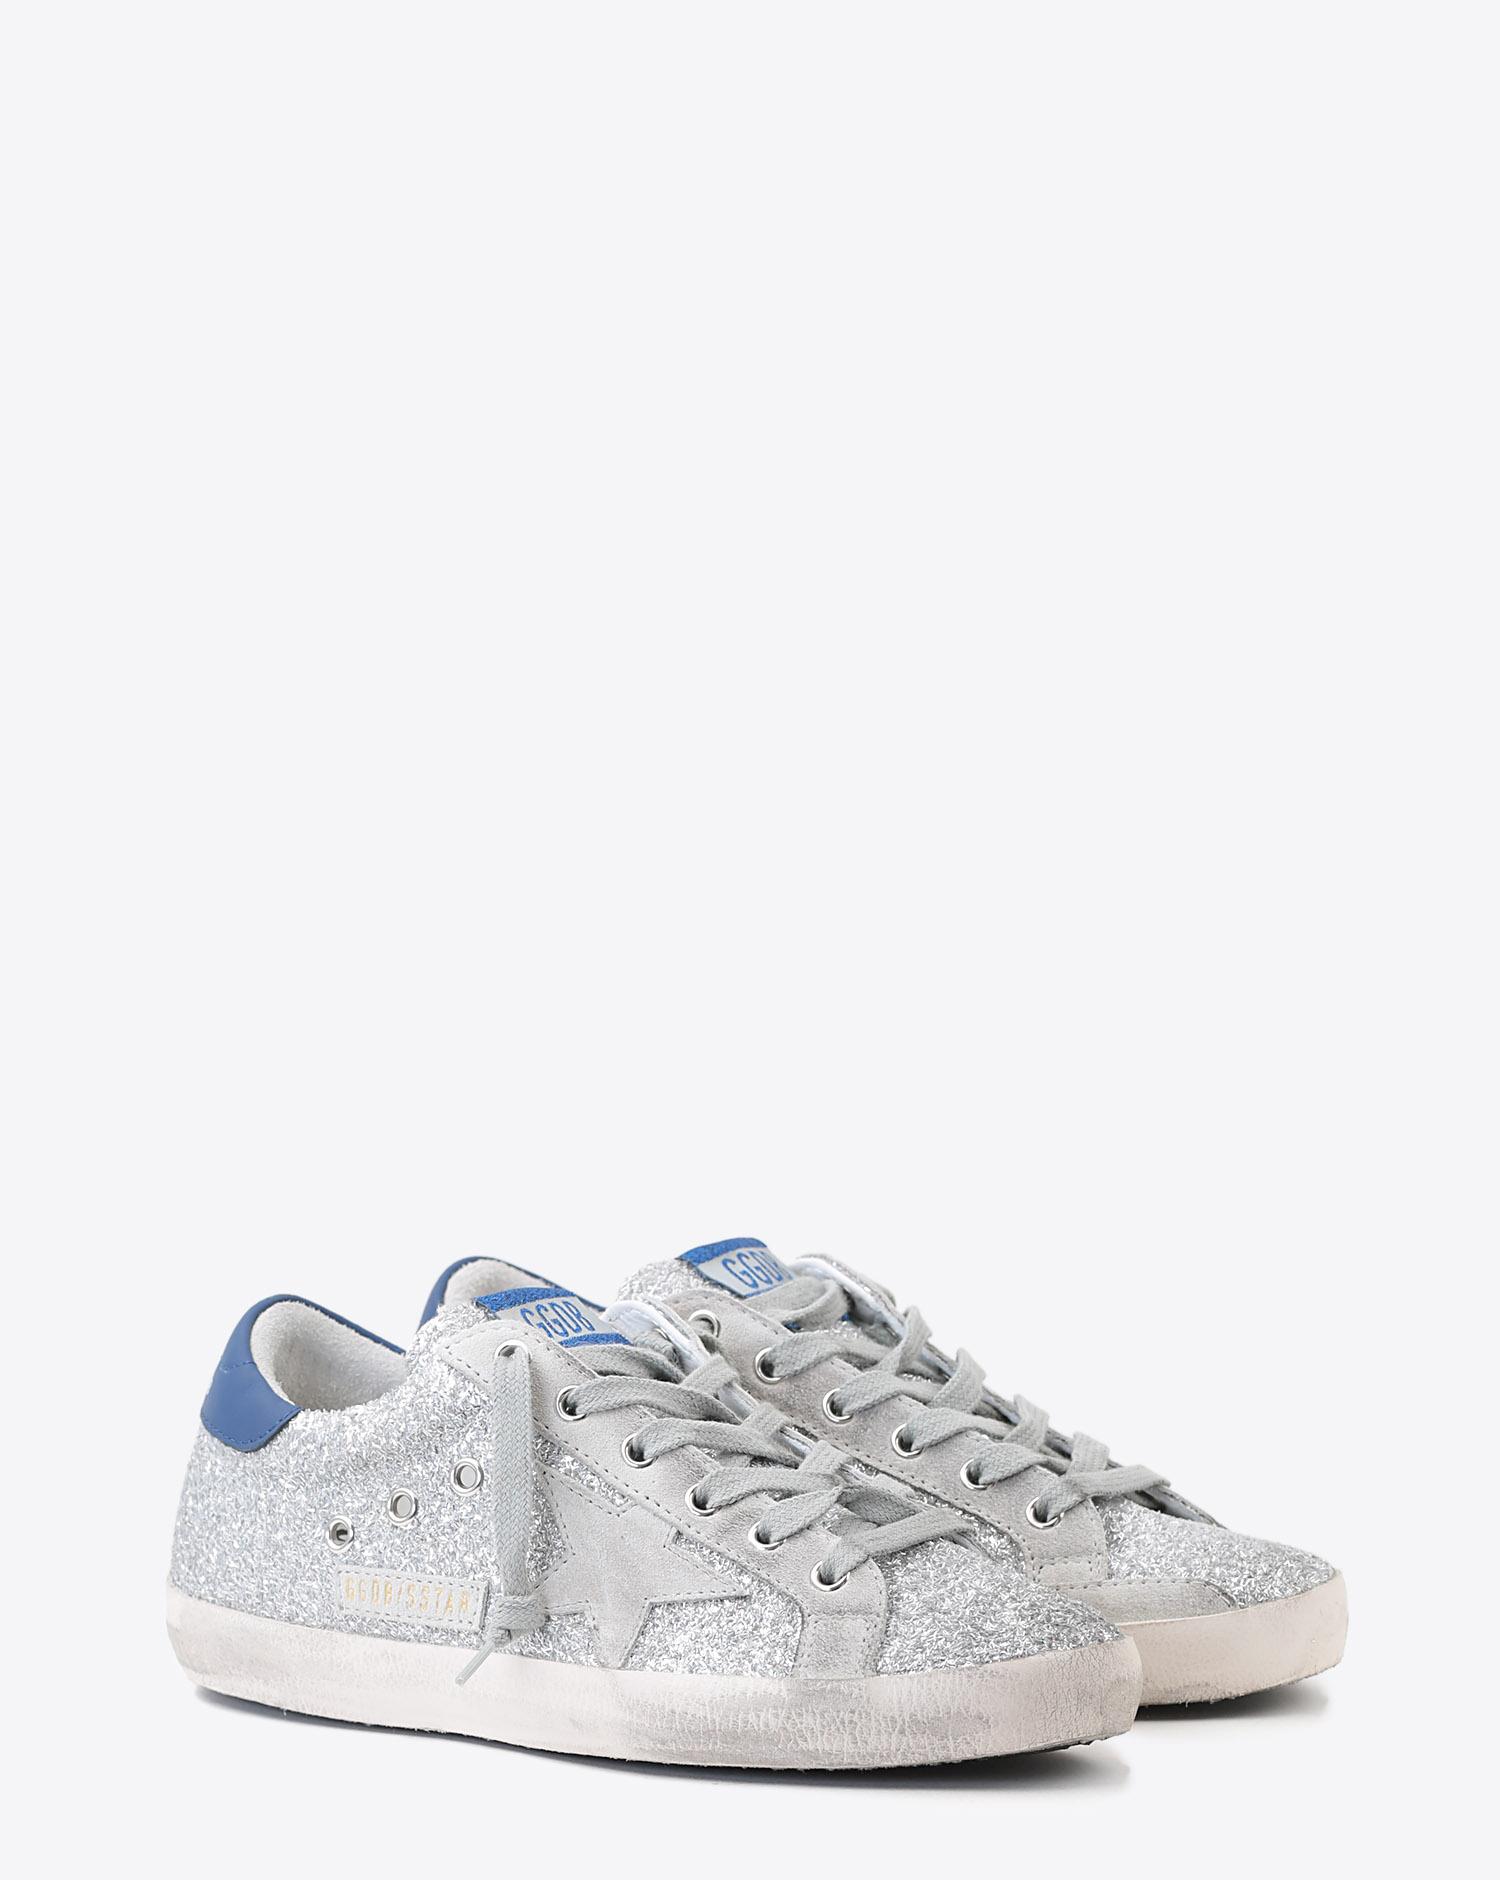 Golden Goose Woman Pré-Collection Sneakers Superstar - Silver Glitter Blue- Ice Star  